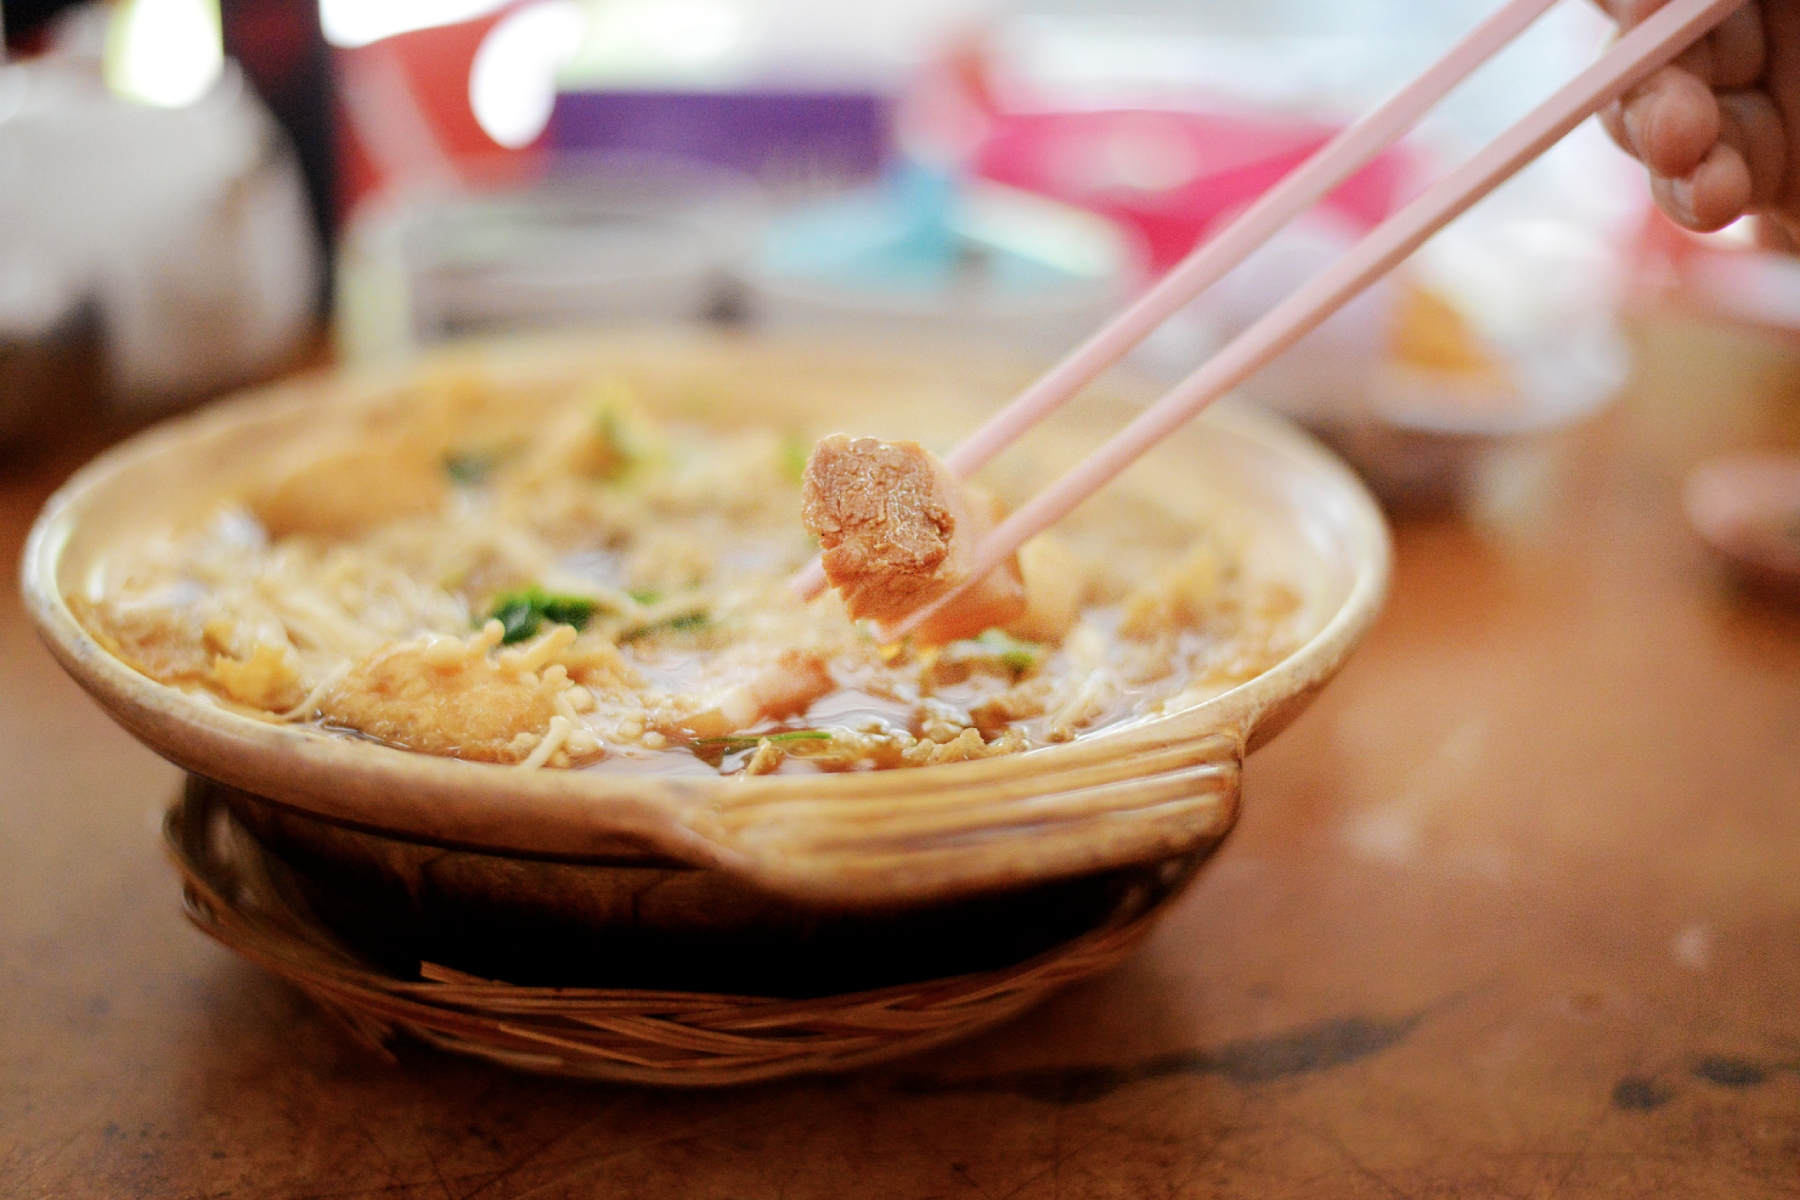 A close-up shot of a bowl of bak kut teh and a pair of chopsticks clasping a piece of pork. Bak kut teh (or 'meat bone tea') is a popular Chinese soup found in Singapore.